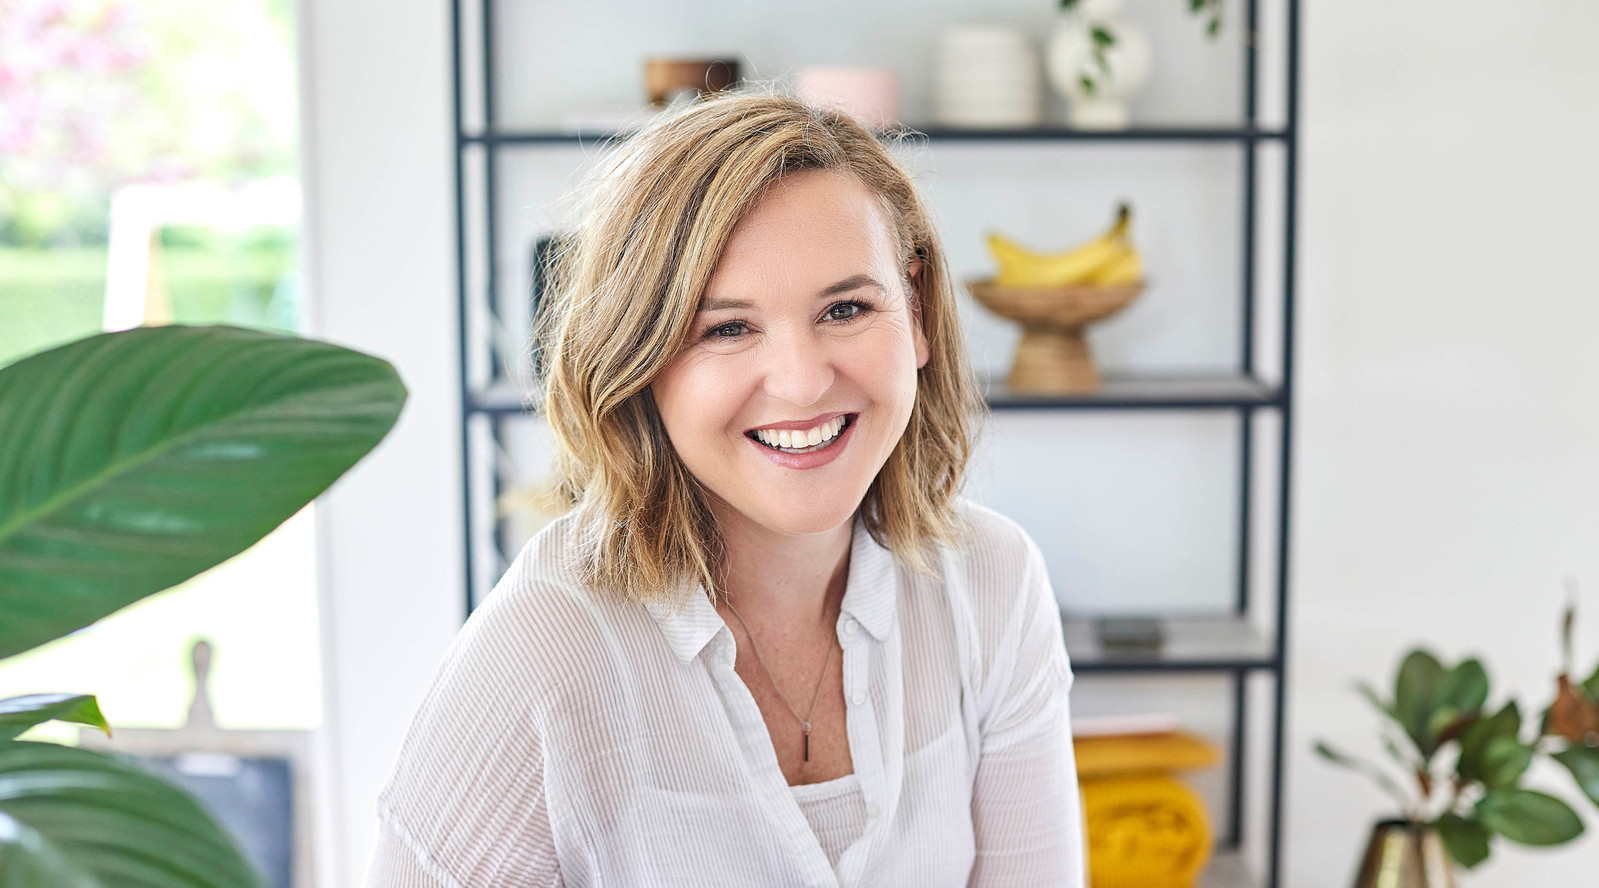 personal branding commercial image of women smiling at camera with plant and bookshelf in background